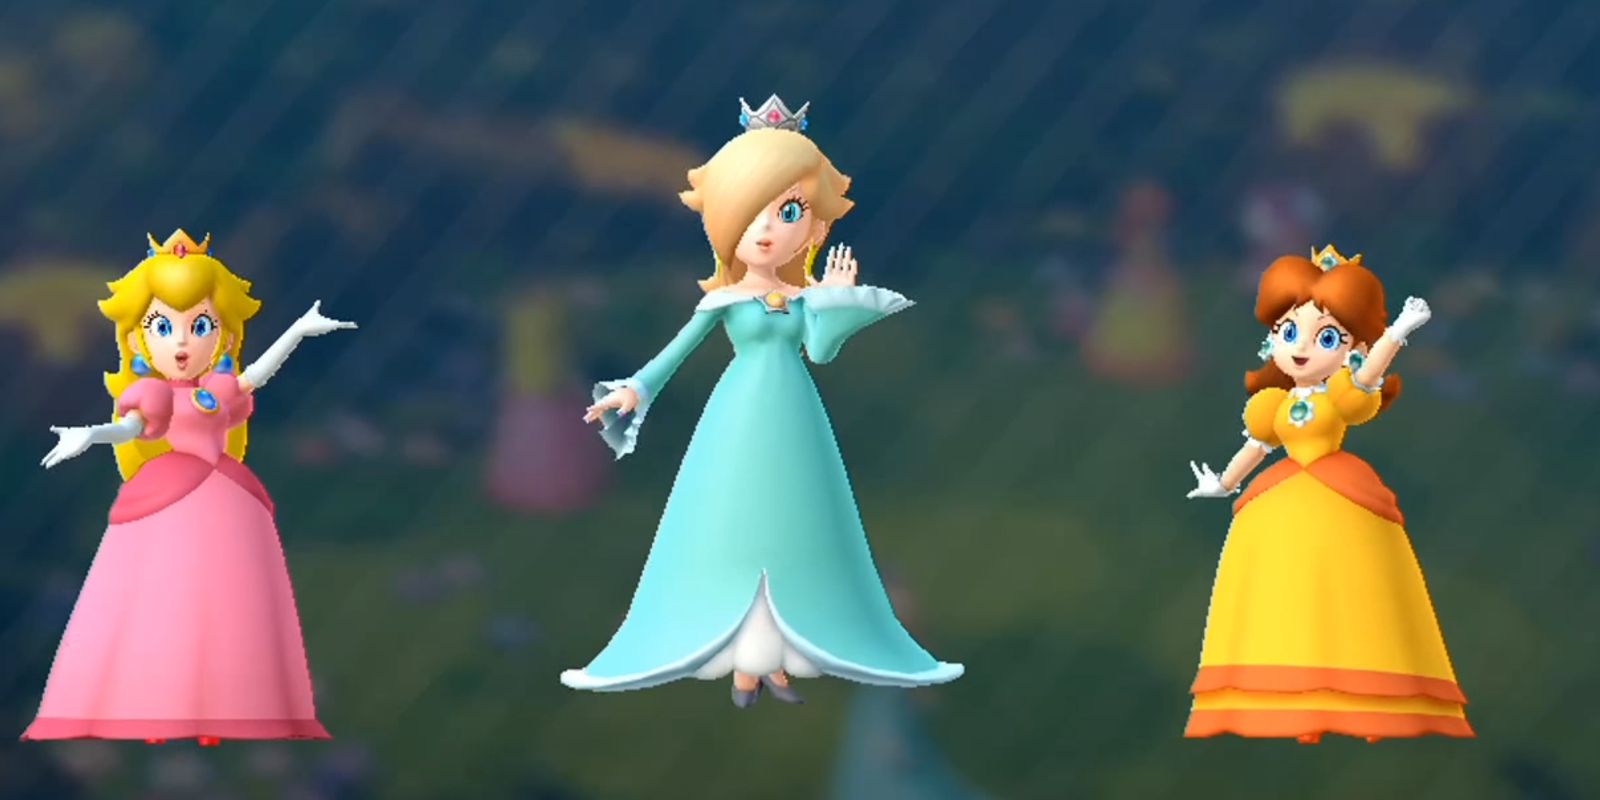 Princess Peach, Daisy, and Rosaline striking a victory pose in Mario Party 10